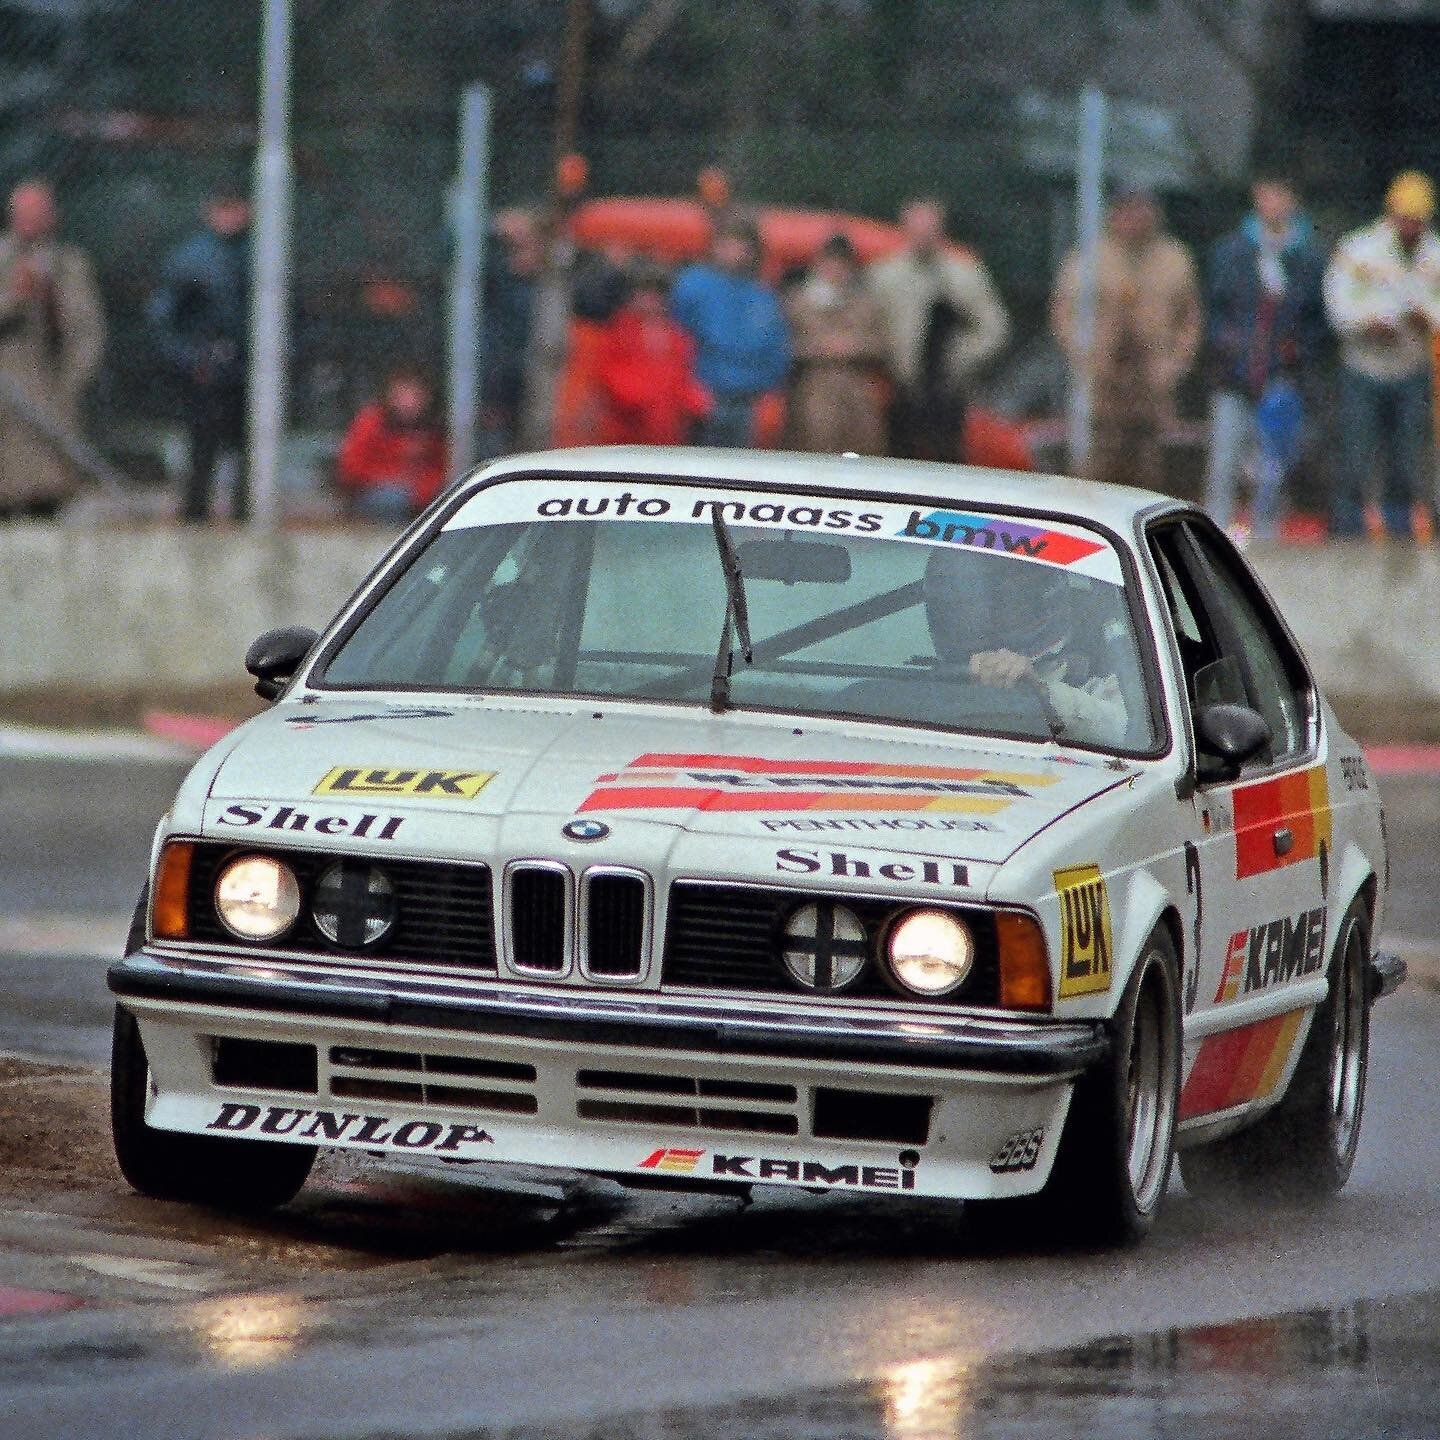 The Kamei BMW 635 csi raced by Kurt K&ouml;nig at the Bergischer L&ouml;we in Zolder, second round of the 1987 Deutsche Tourenwagen Meisterschaft. The old lady would finish 12th of a rainy race won by Marc Hessel with the Zakspeed BMW M3. The first p